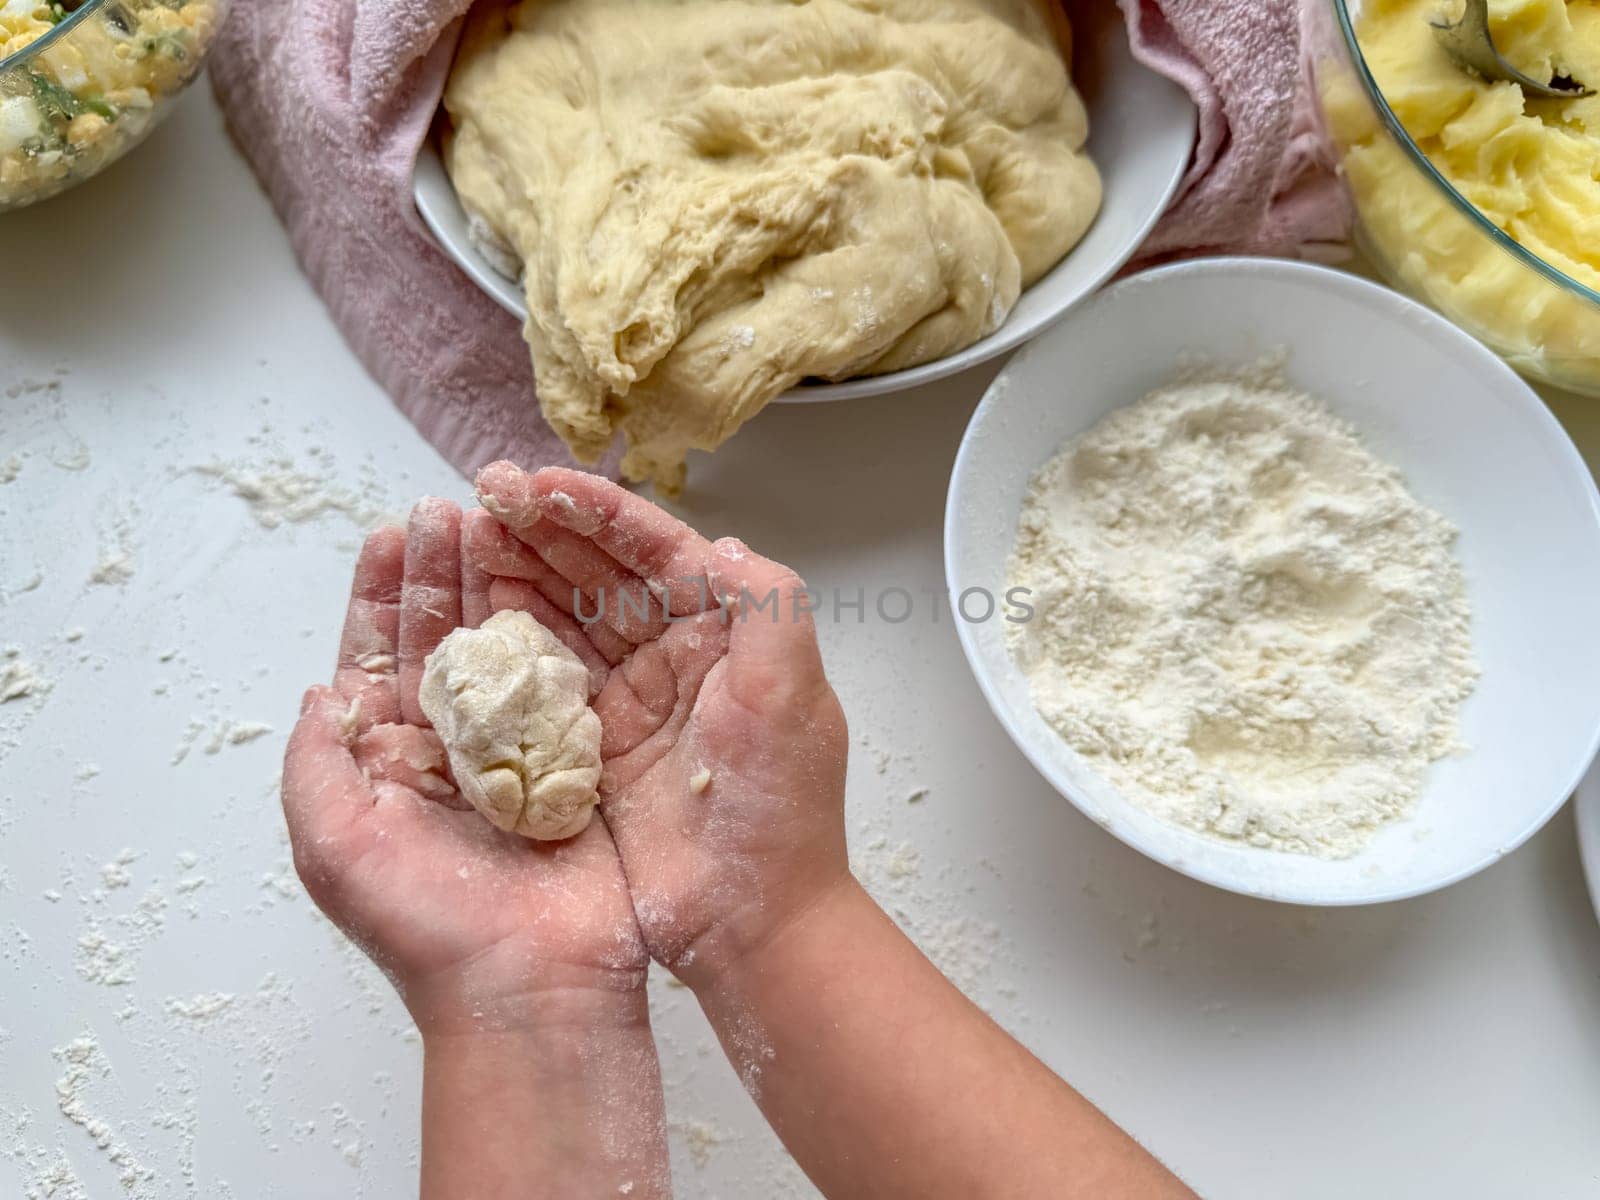 The hands of child knead the dough for making pies on white table, top view. by Lunnica